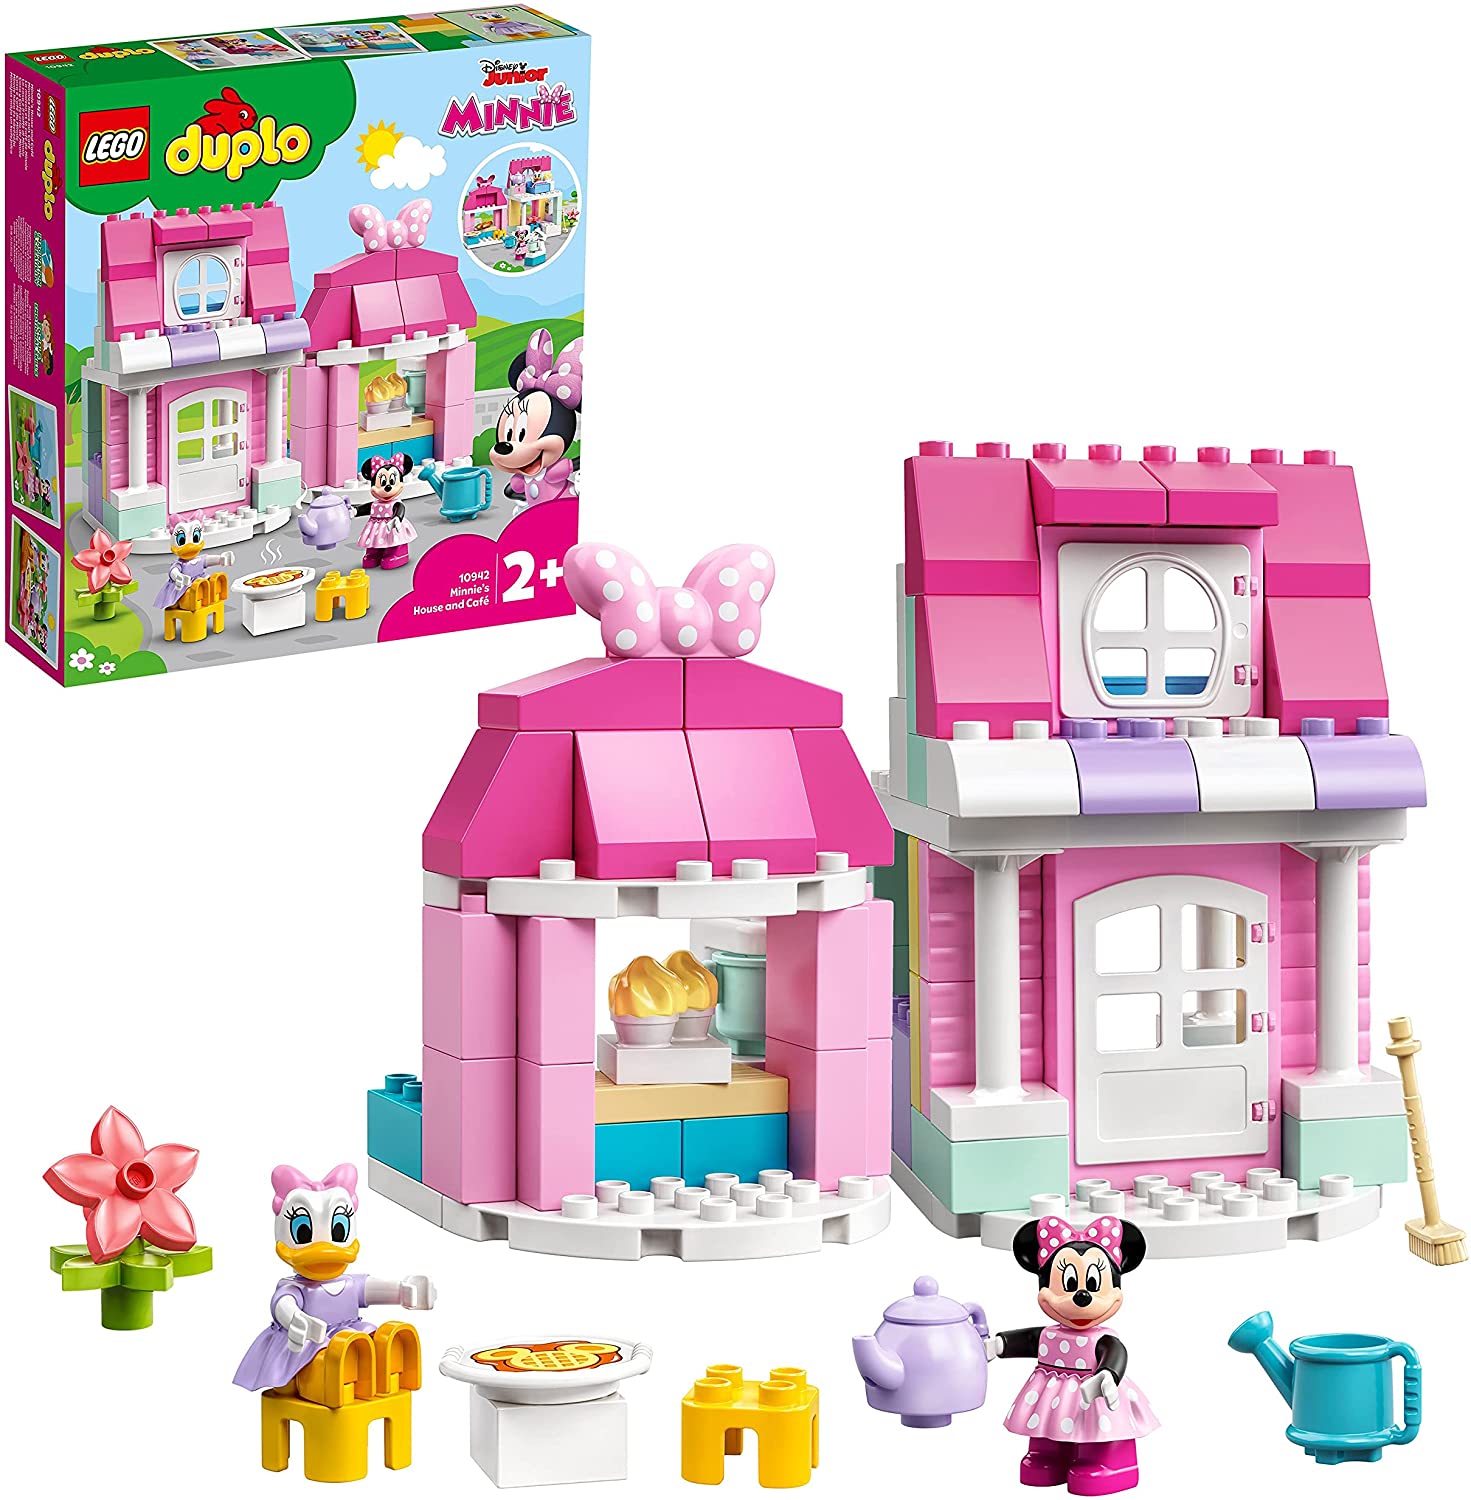 LEGO 10942 Duplo Disney Minnies House with Café, Minnie Mouse Toy for Build